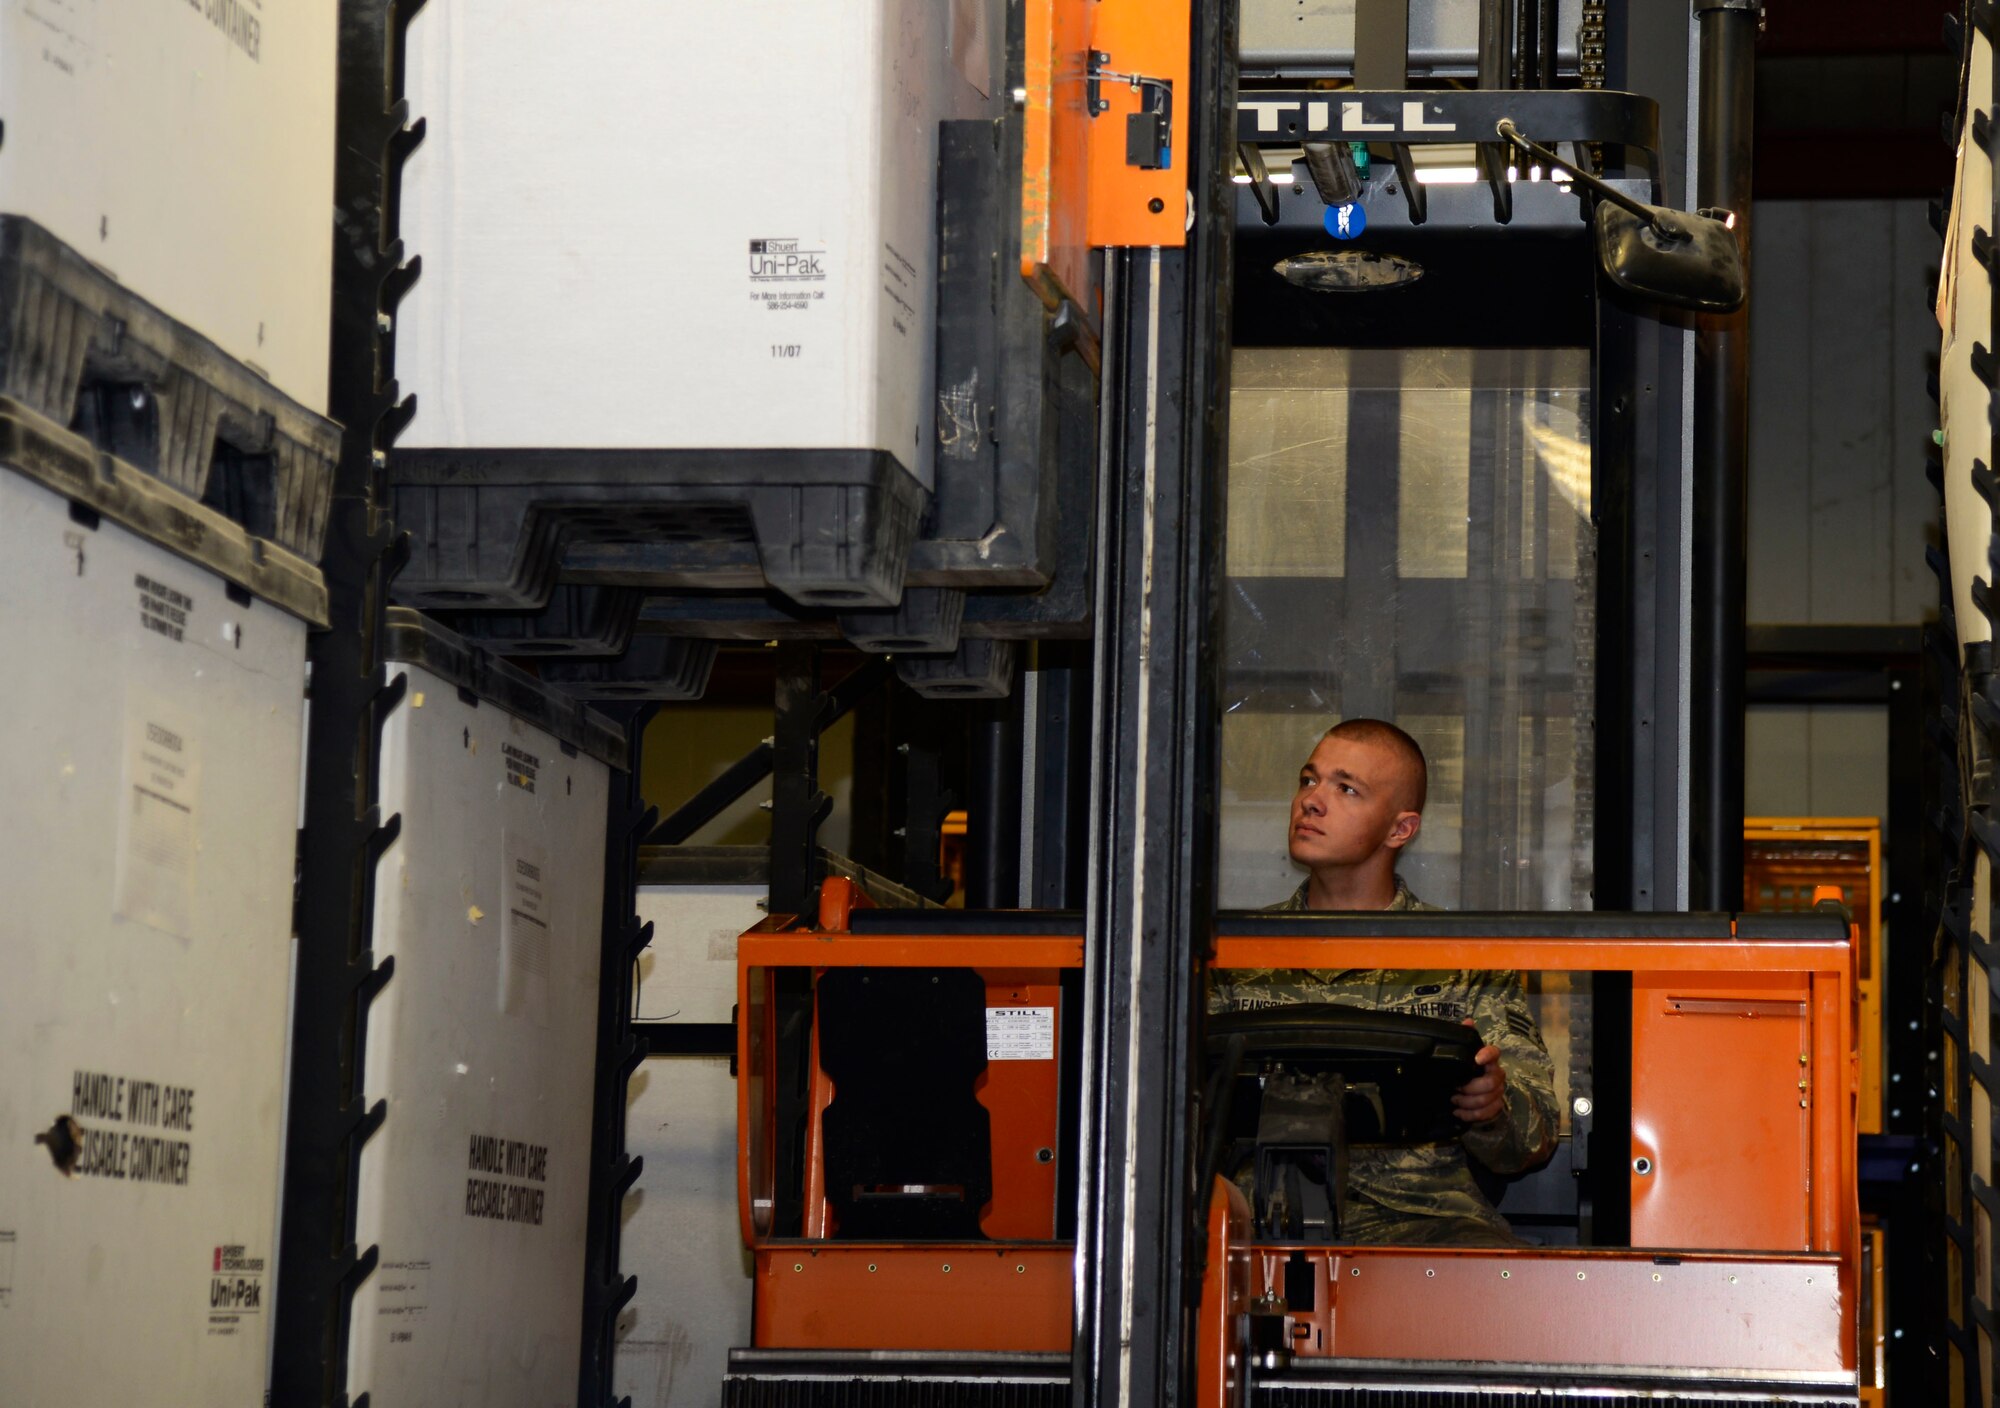 U.S. Air Force Senior Airman Vadim Poleanschi, a 386th Expeditionary Logistic Readiness Squadron logistic specialist, uses a forklift to move a pallet at an undisclosed location in Southwest Asia on June 3, 2015. Logistic specialist supplies aircraft with parts and personnel with equipment to carry out the mission downrange. (U.S. Air Force photo by Senior Airman Racheal E. Watson/Released)